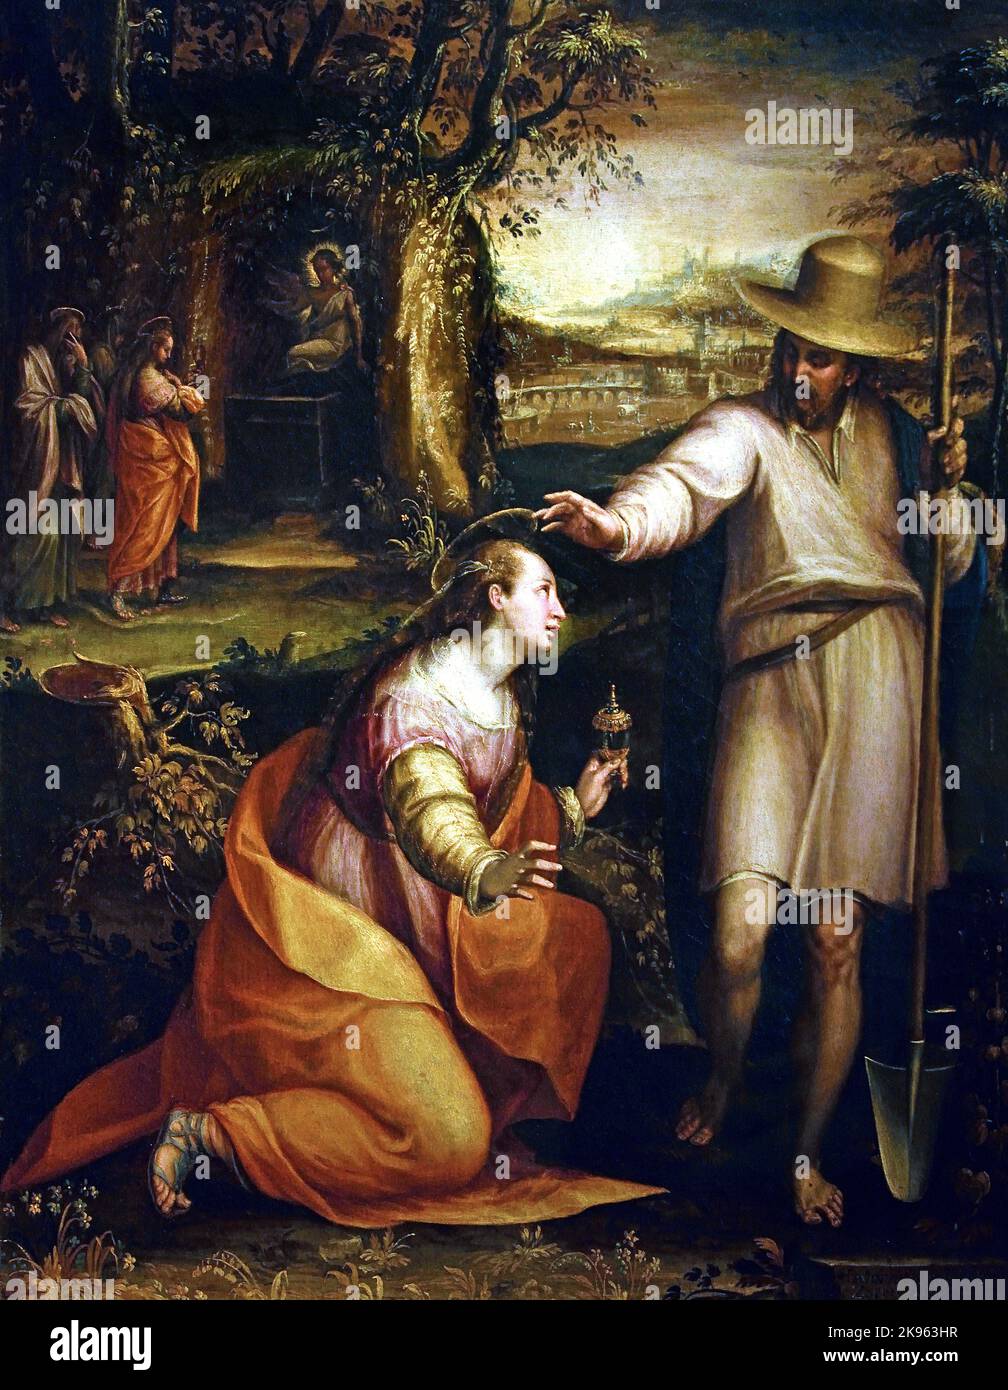 Christ Appears to Mary Magdalen - Mary Magdalene 1581 ( Noli me Tangere) 1581 LAVINIA FONTANA (1552 - 1614) France French ( Noli me tangere ,(touch me not ), Latin version of a phrase spoken, according to John 20:17, Jesus to Mary Magdalene when she recognized him after his, resurrection, ) Stock Photo